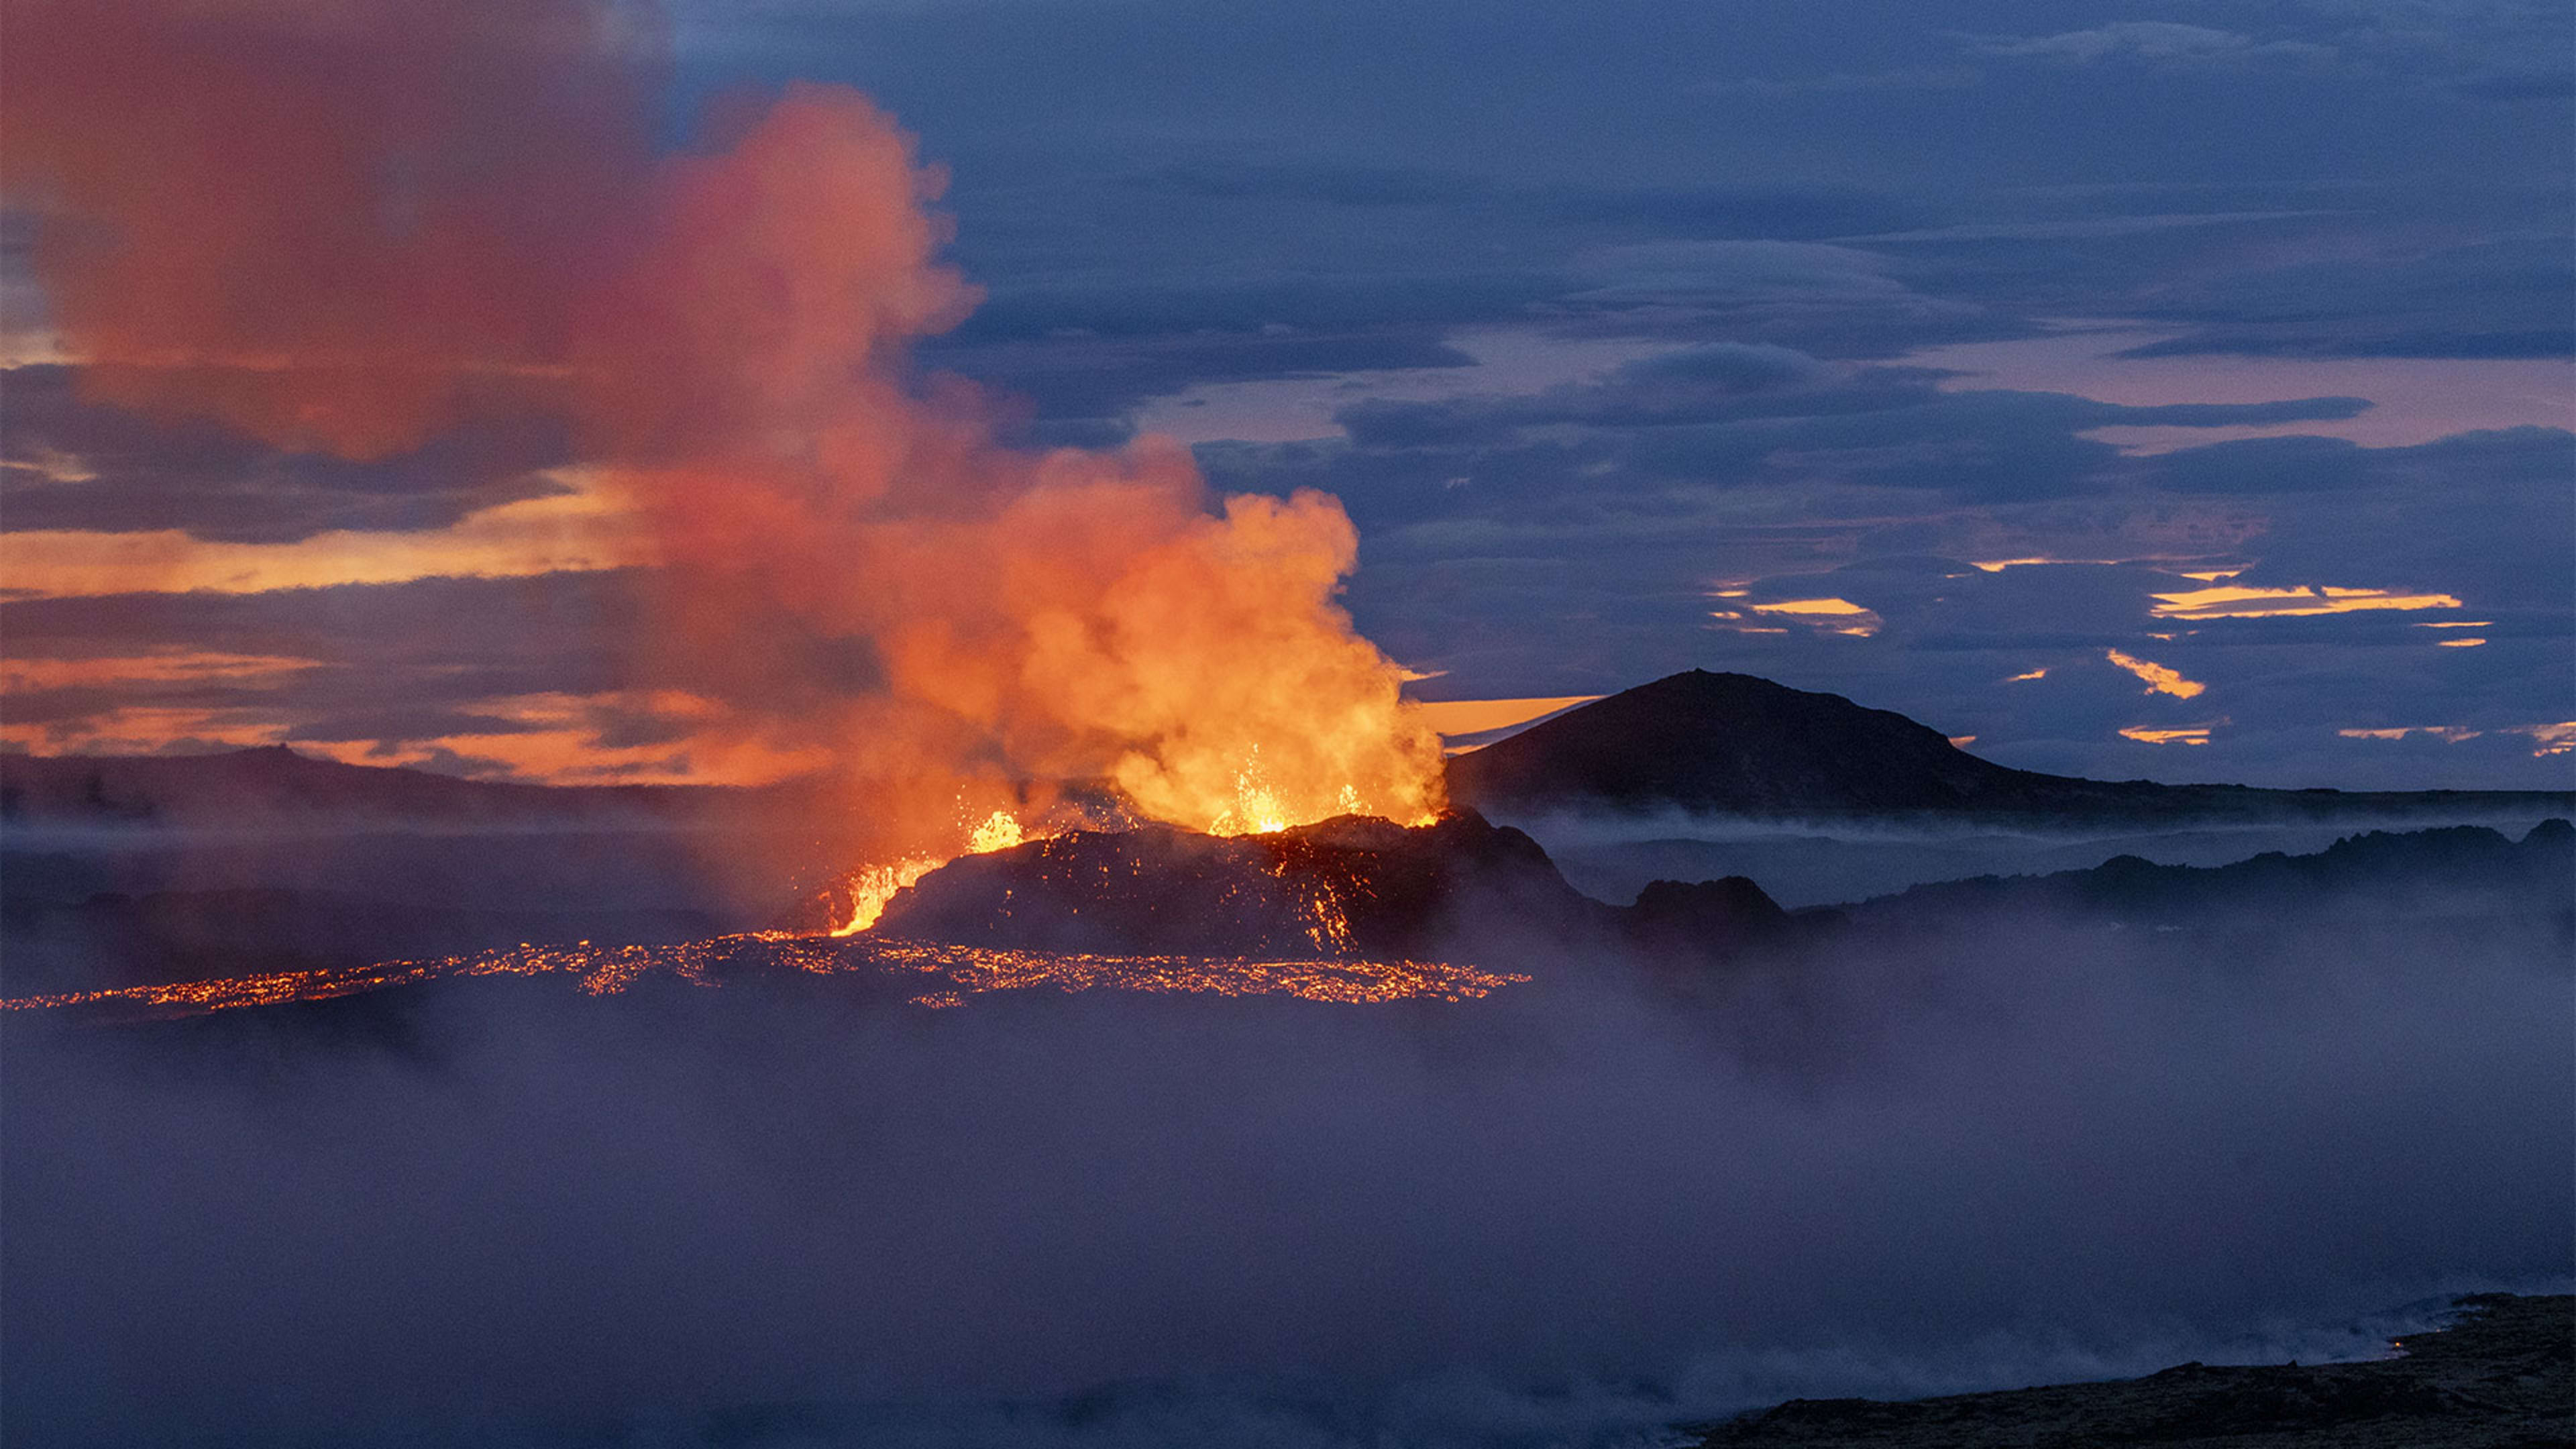 What’s happening in Iceland? Thousands of earthquakes hit as volcanic eruption deemed imminent